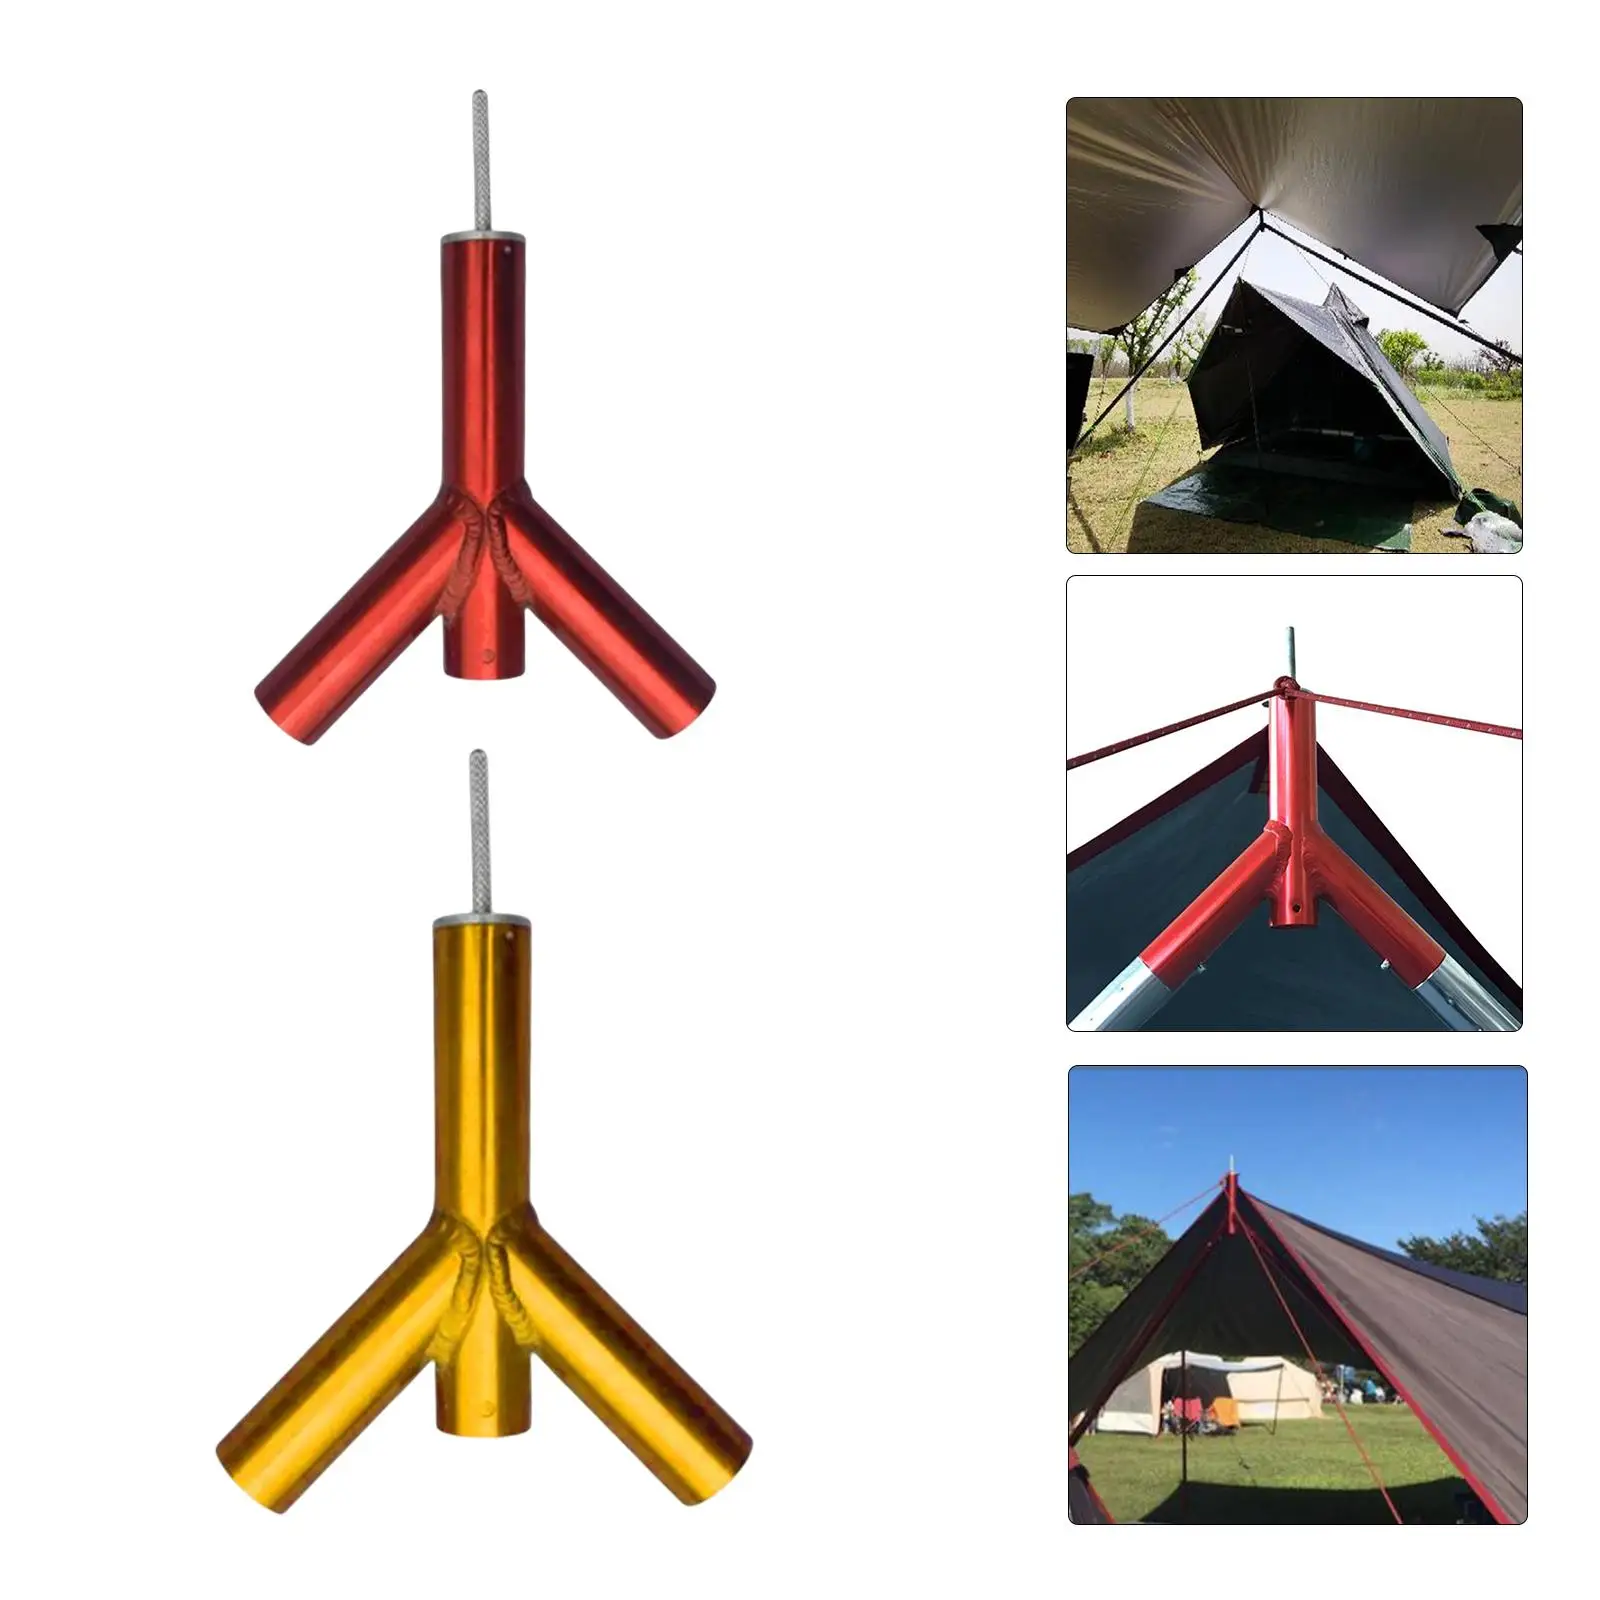 Lightweight Camping Tent Tarp Poles Canopy Awning Rod Support Replacement